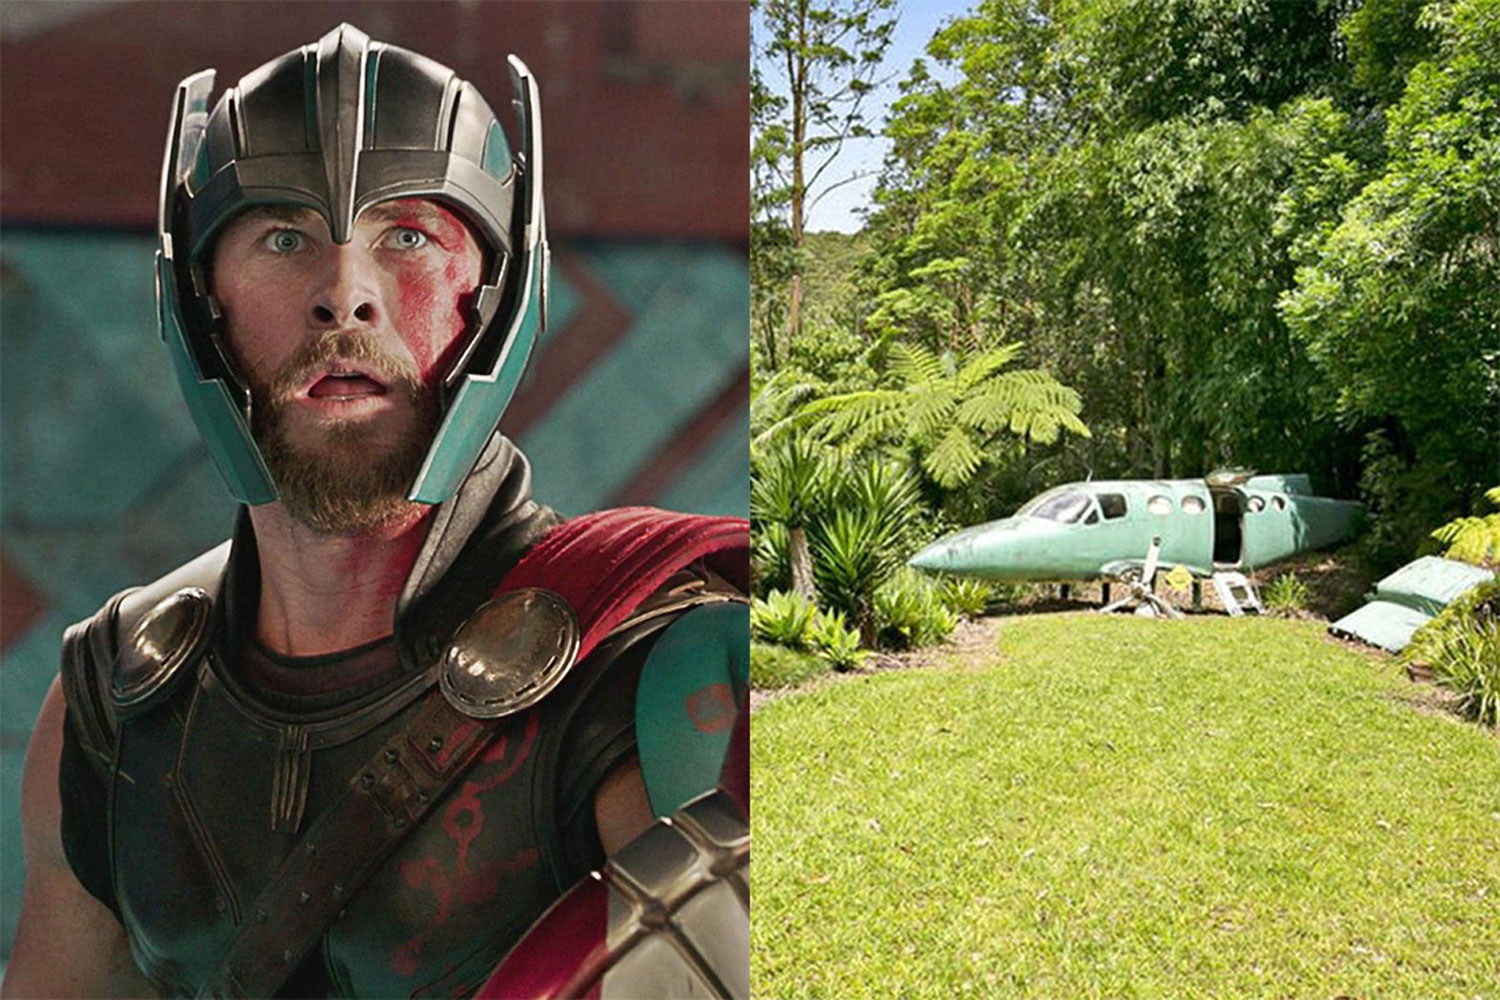 ‘Thor: Ragnarok’ Fans Will Be On Cloud 9 If They Snap Up This Queensland Home